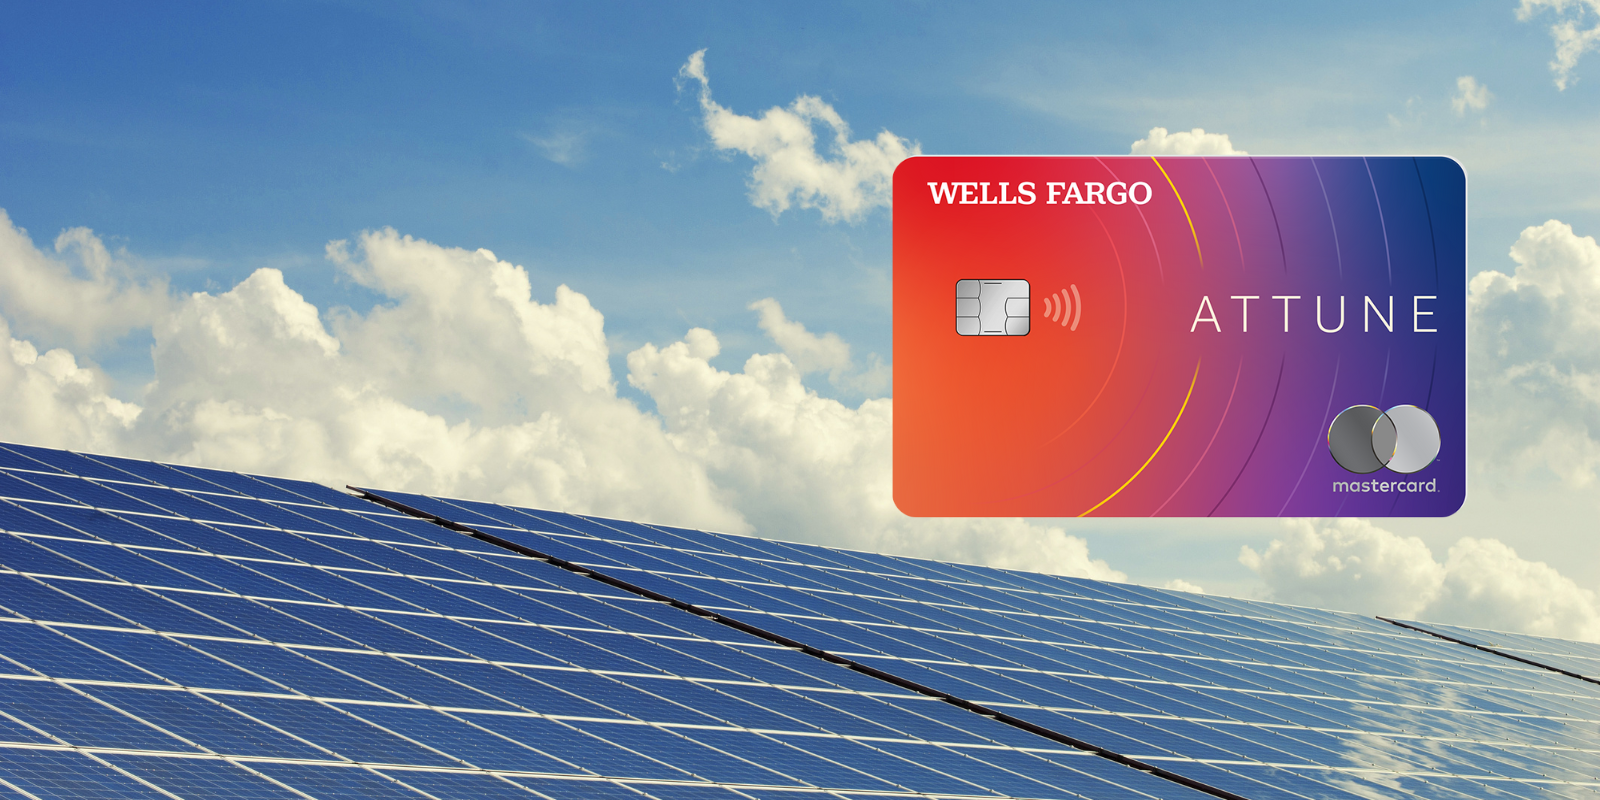 Wells Fargo Launches the Attune℠ Card, Supporting Capital Link's Solar Energy Initiatives